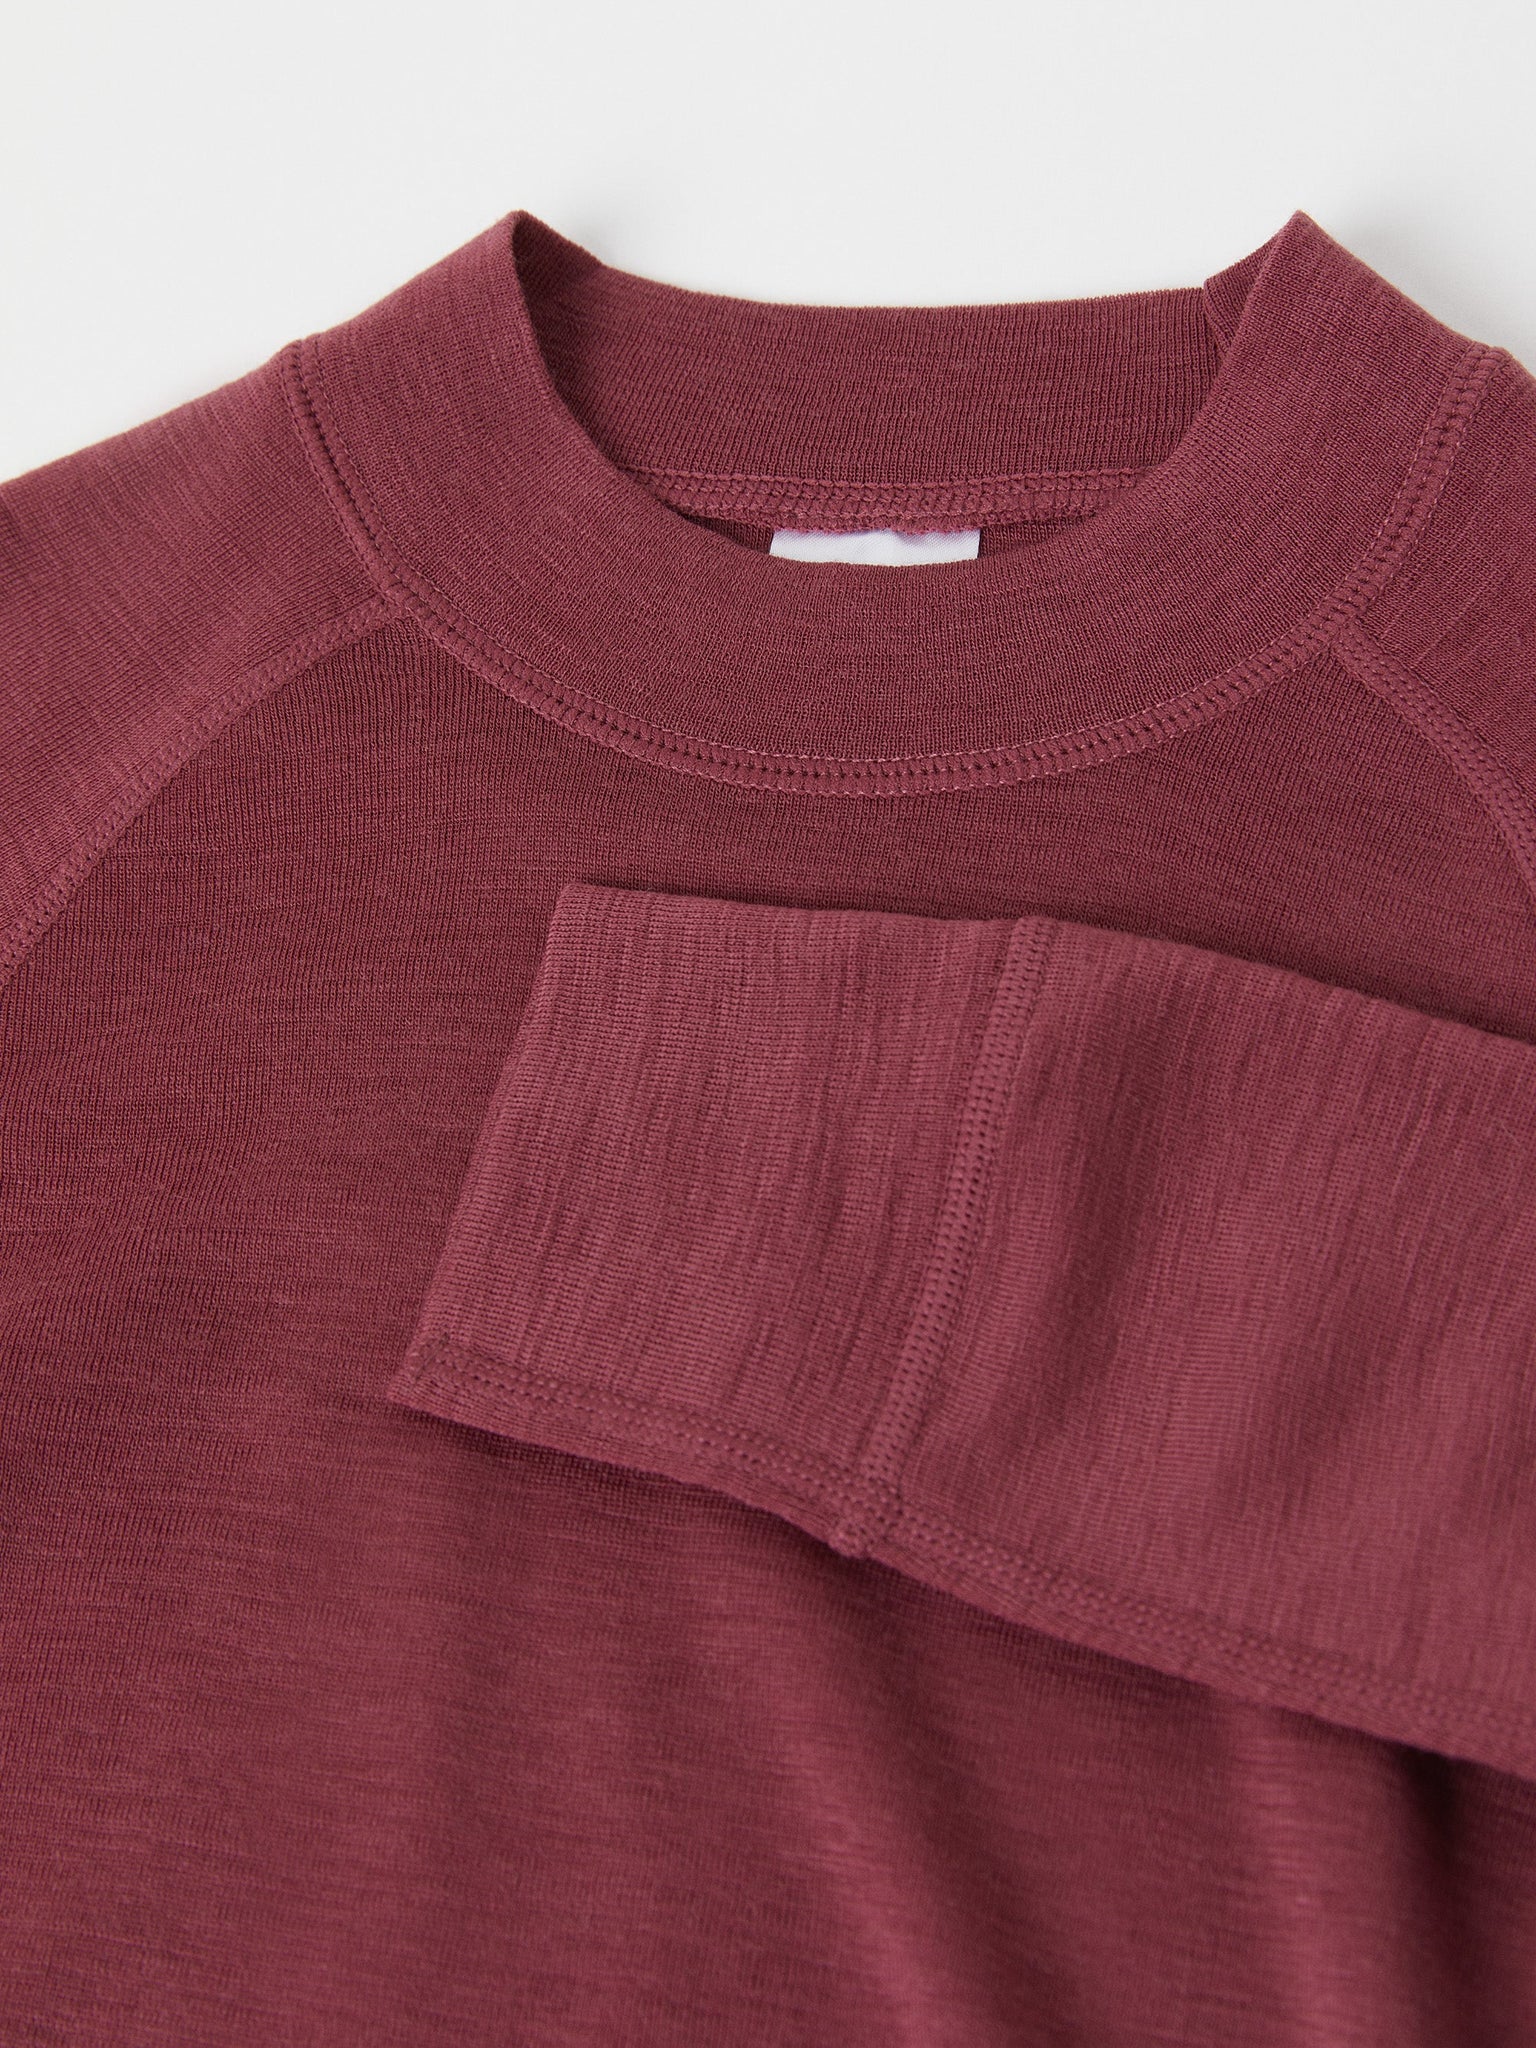 Red Merino Wool Kids Thermal Top from the Polarn O. Pyret outerwear collection. The best ethical kids outerwear.